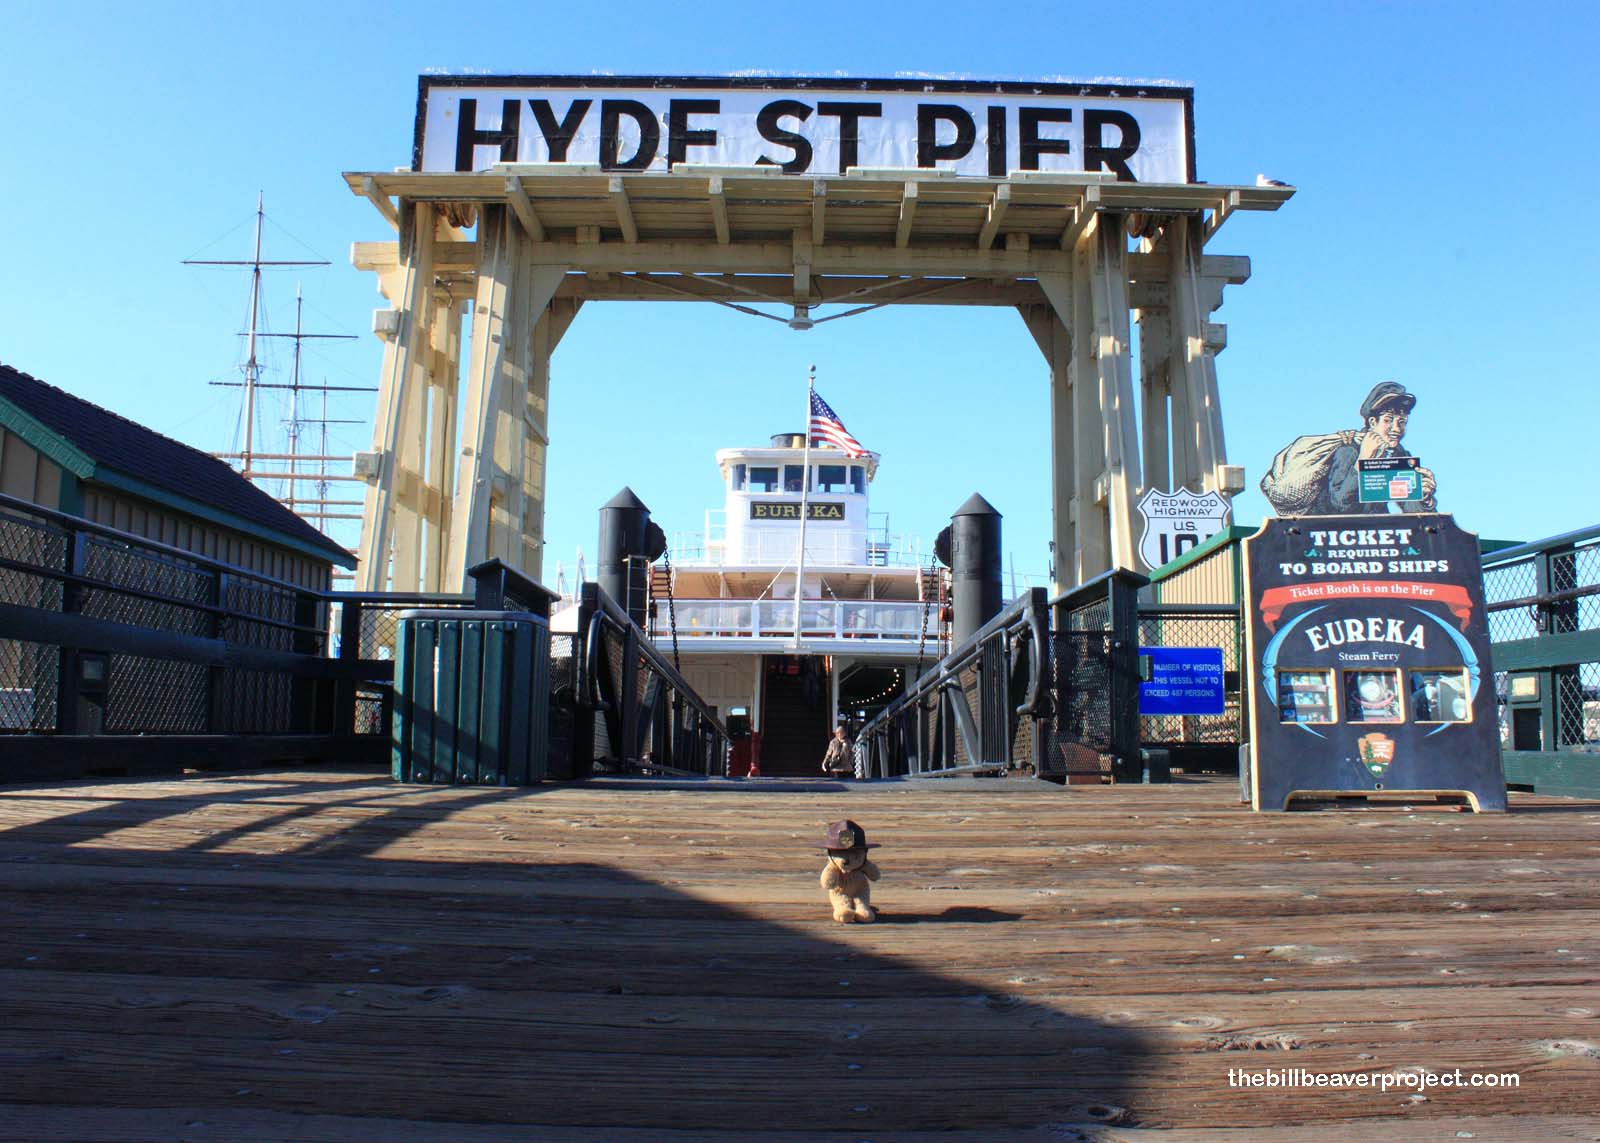 The Hyde Street Pier is the place to be for historic ships!